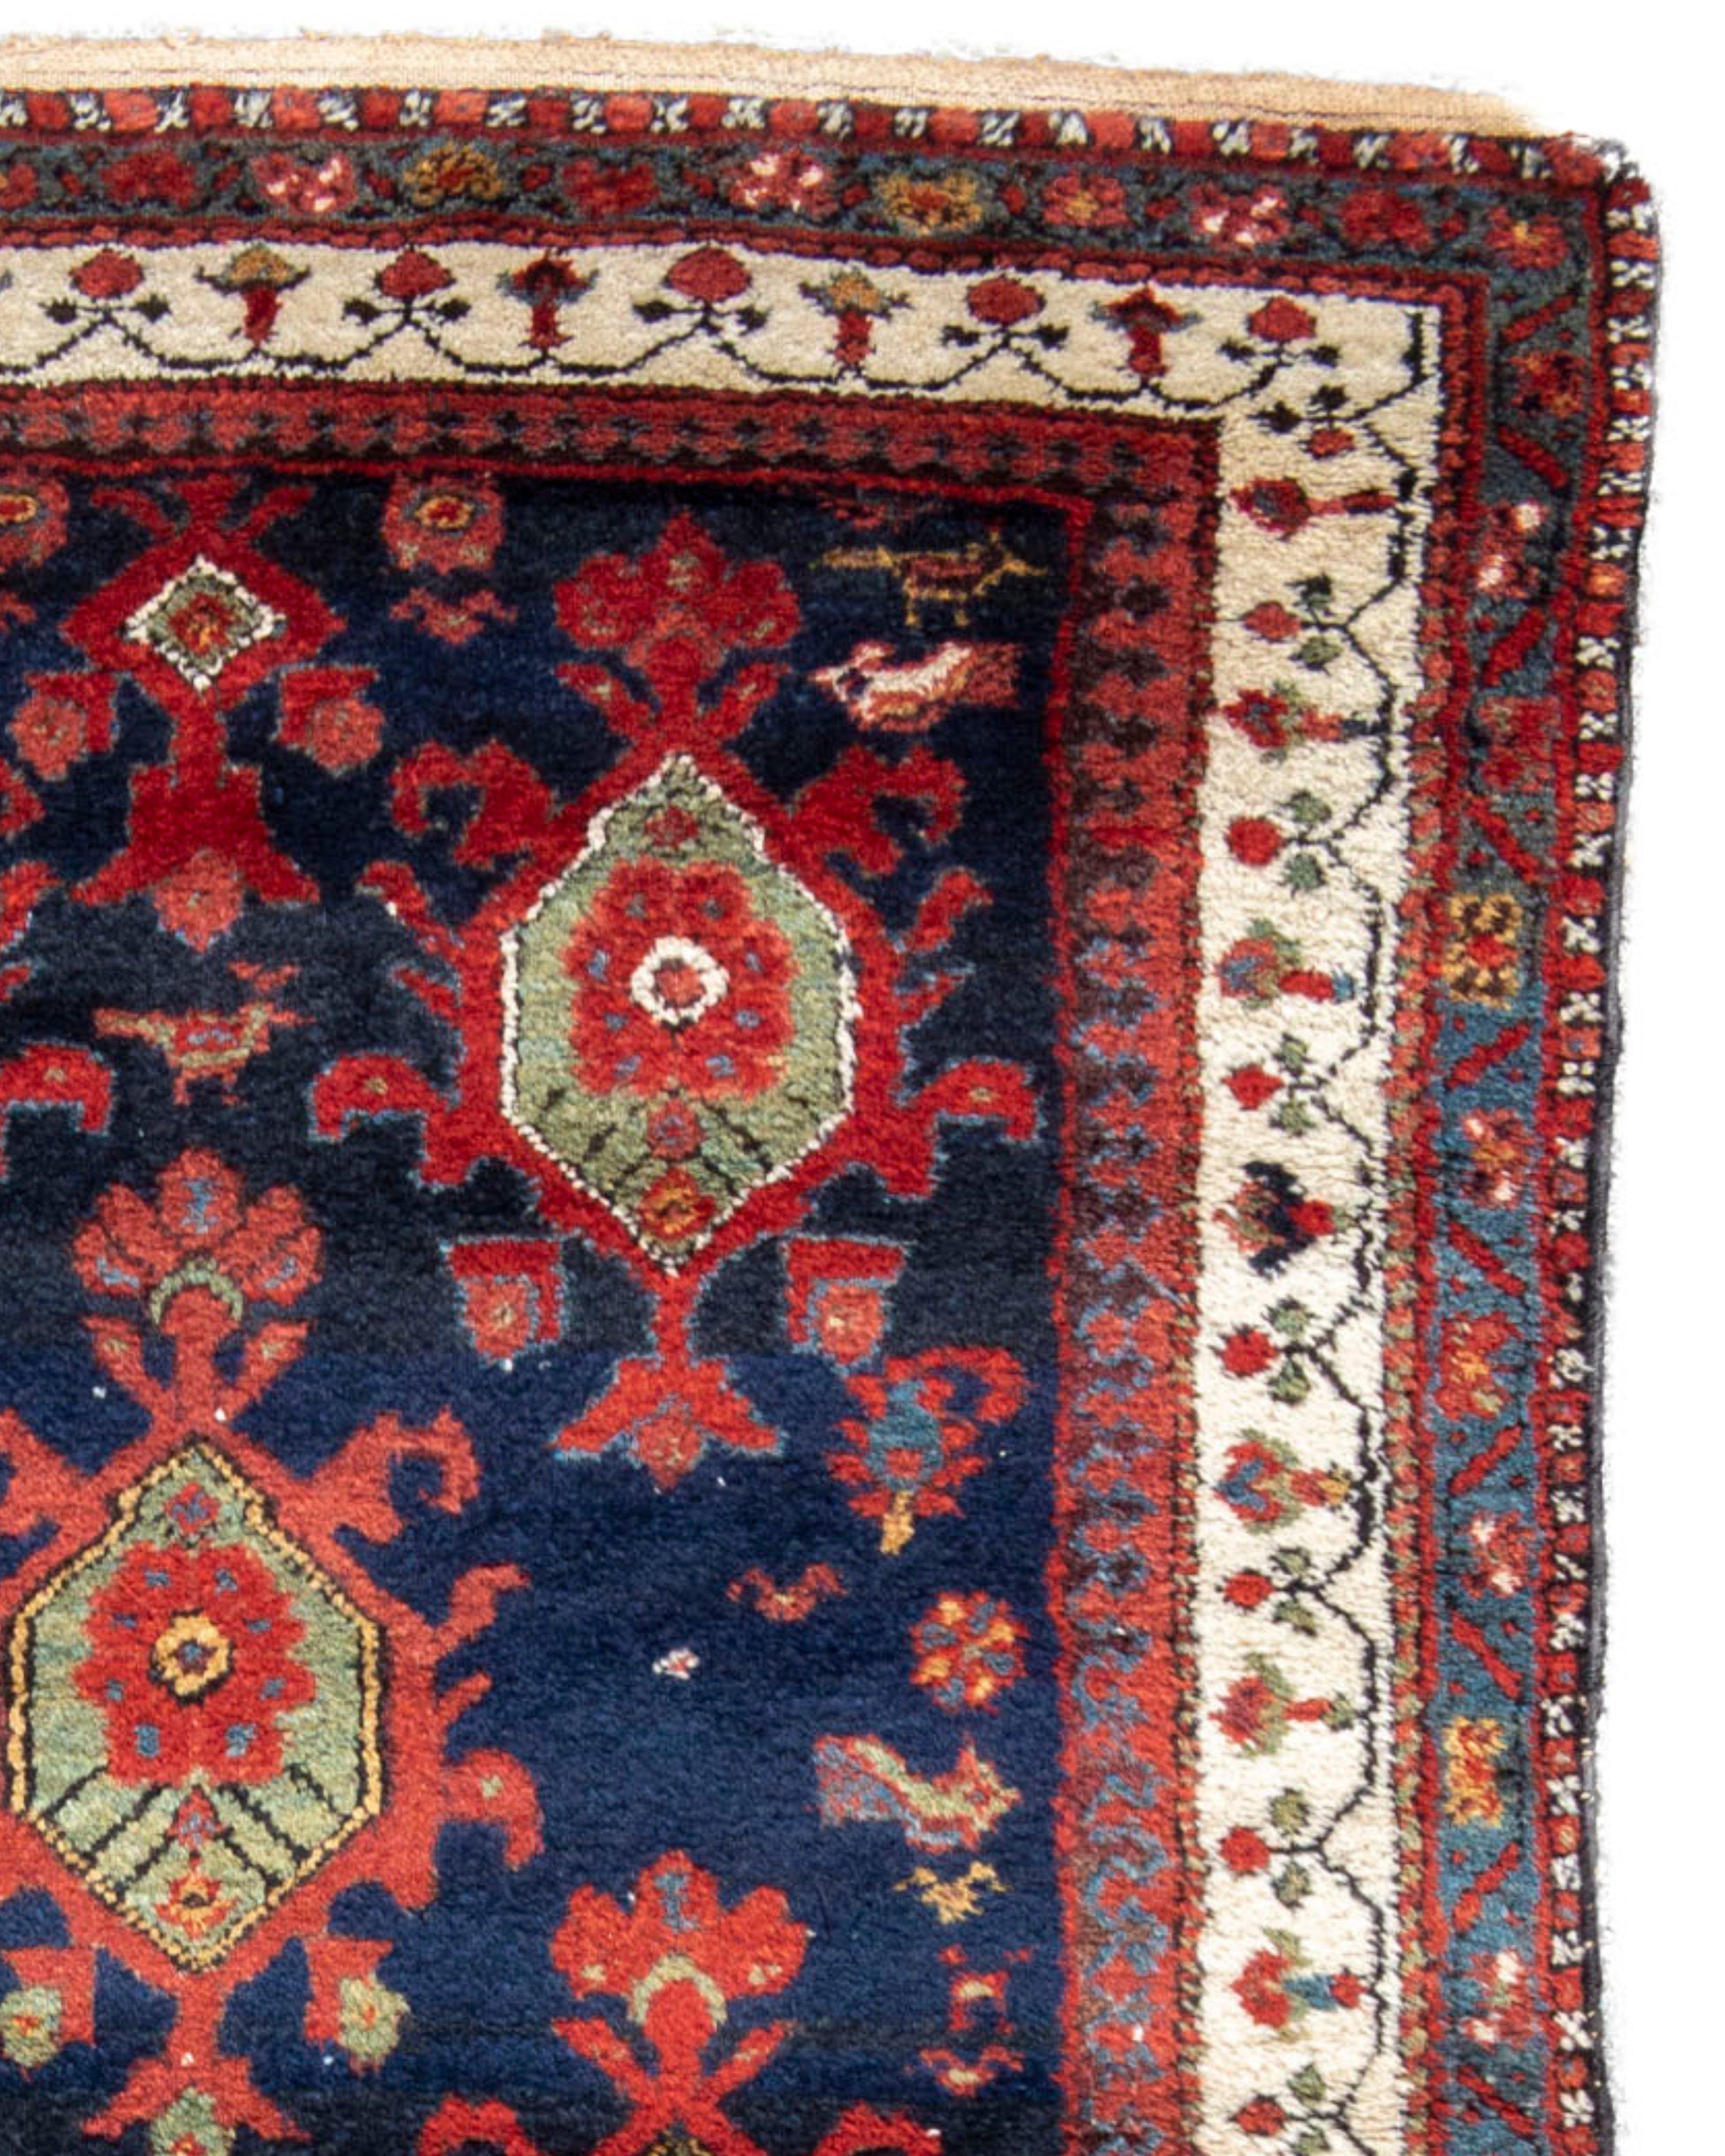 Persian Hamadan Rug, Early 20th Century

Additional Information:
Dimensions: 3'7